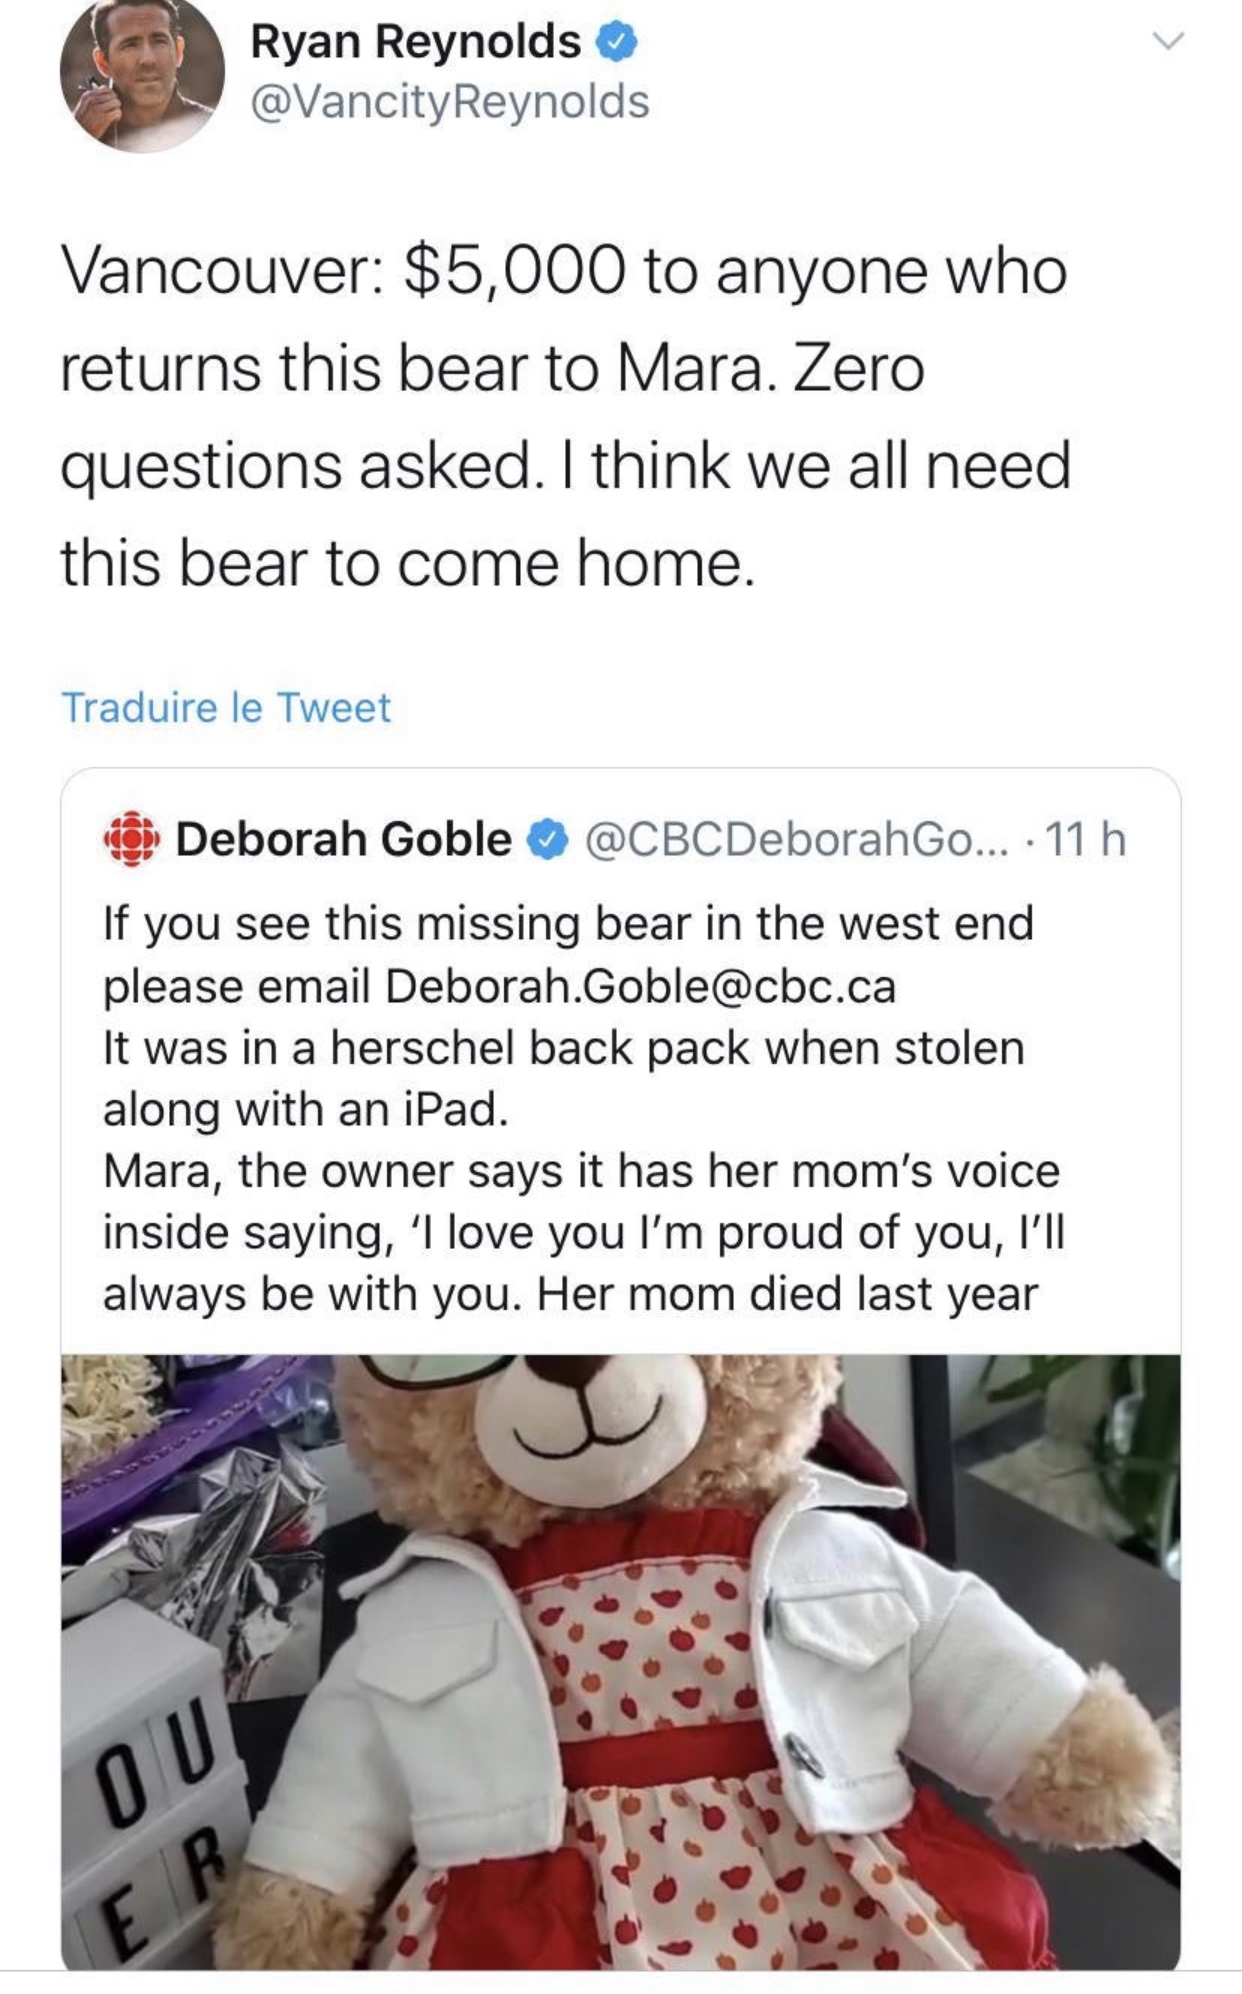 media - Ryan Reynolds Vancouver $5,000 to anyone who returns this bear to Mara. Zero questions asked. I think we all need this bear to come home. Traduire le Tweet Deborah Goble ... 11 h If you see this missing bear in the west end please email Deborah.Go